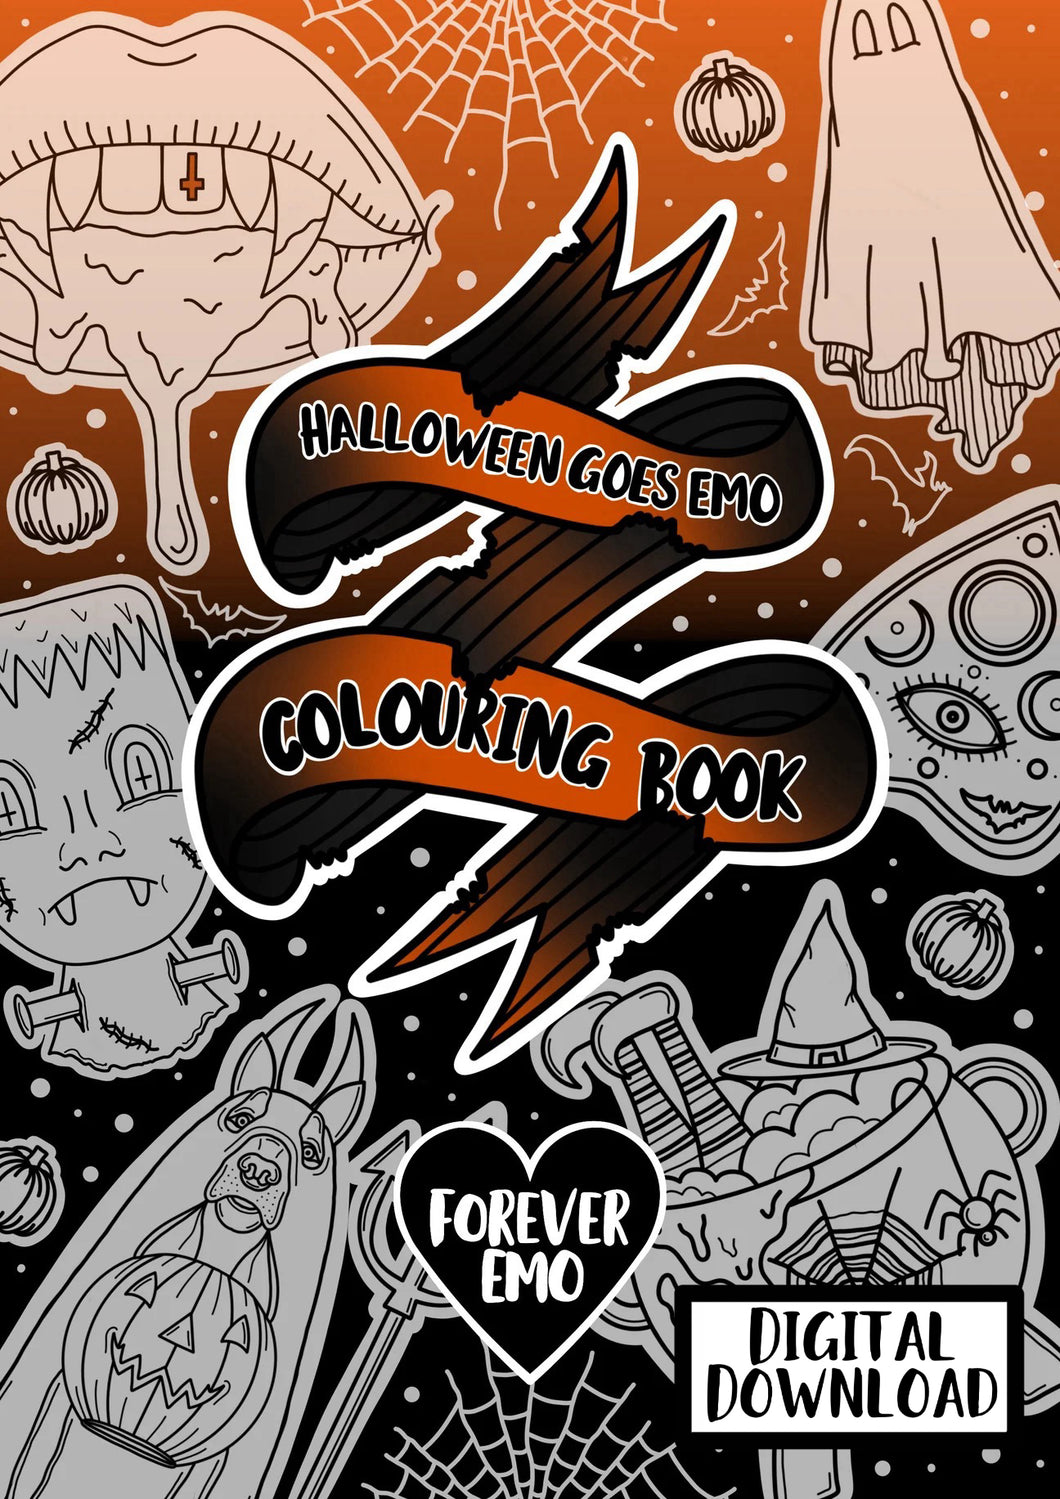 DIGITAL DOWNLOAD Halloween Goes Emo Colouring Book